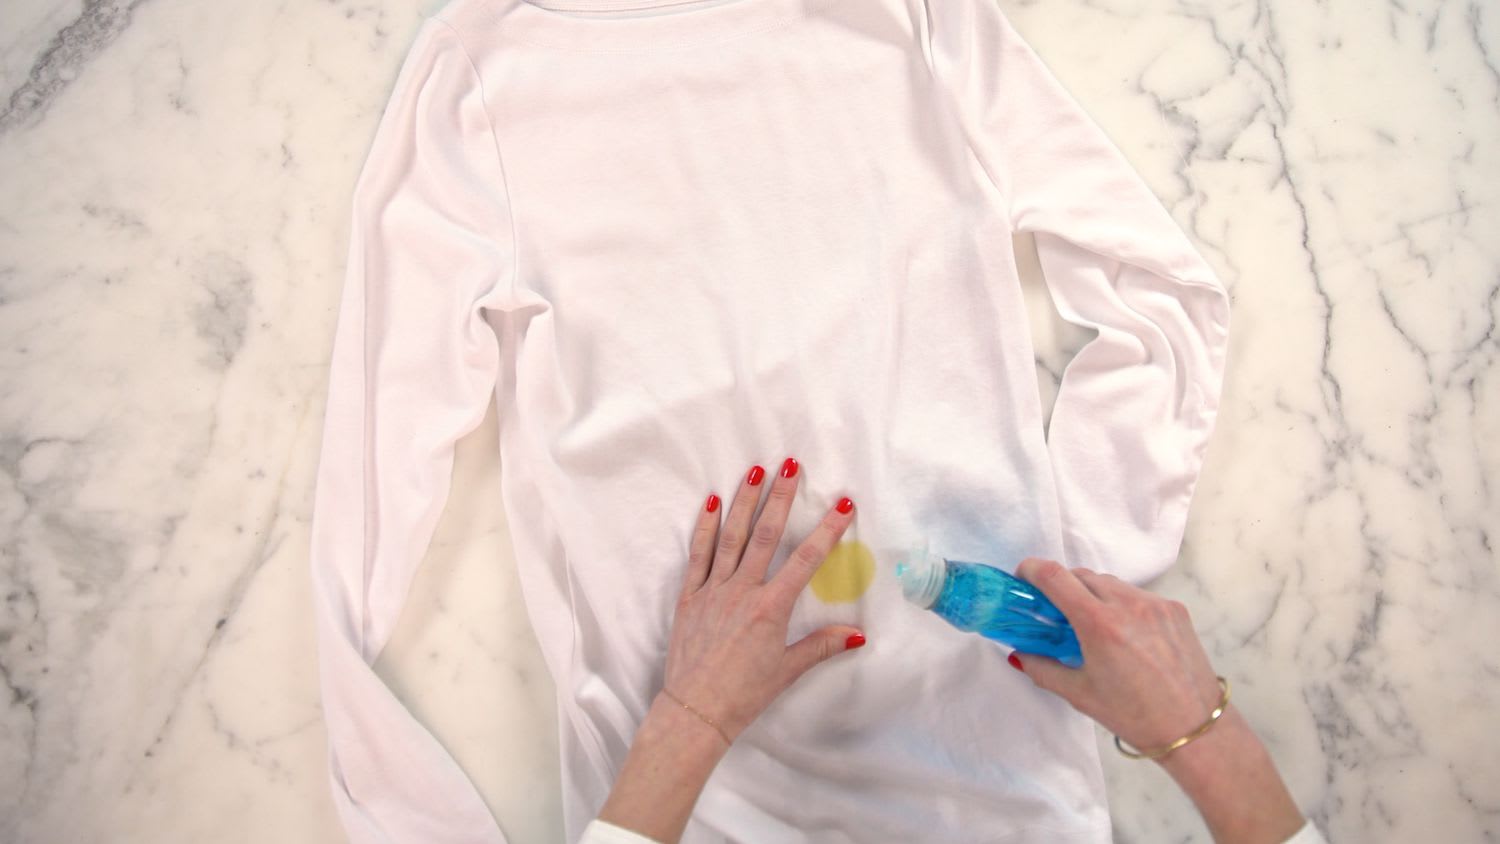 Video: How to Remove Oil Stains From Clothes So They Look Brand New